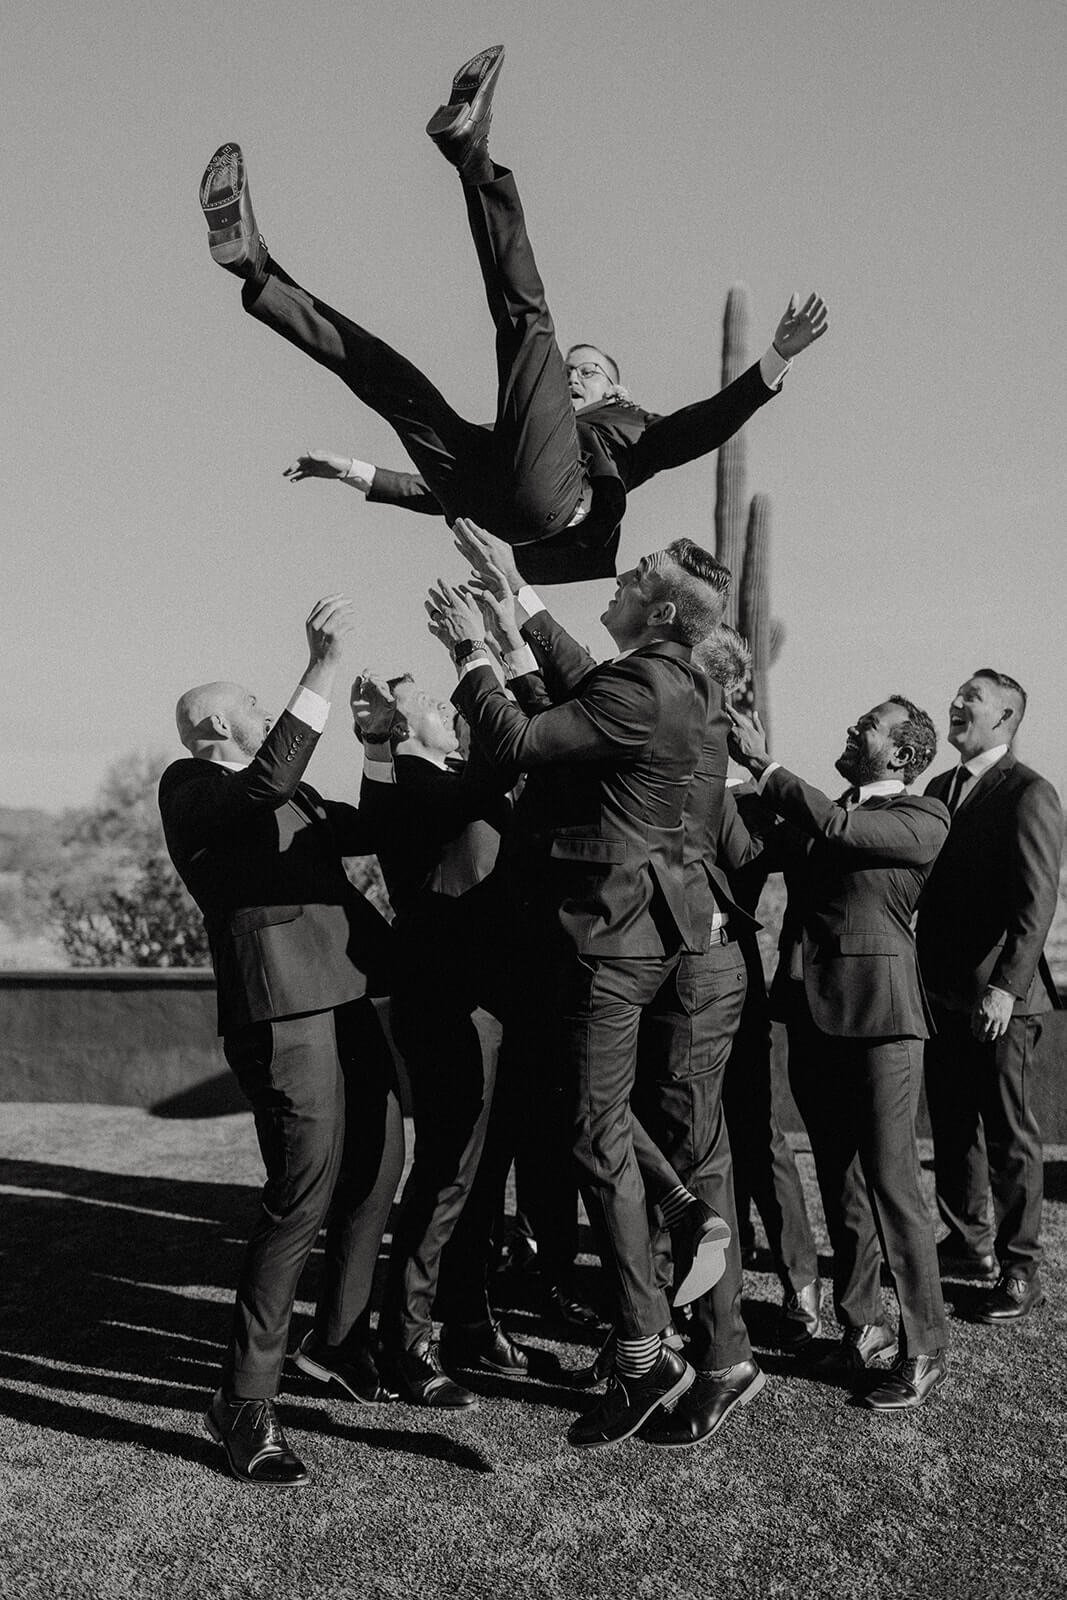 Black and white photo of groomsmen tossing groom in the air